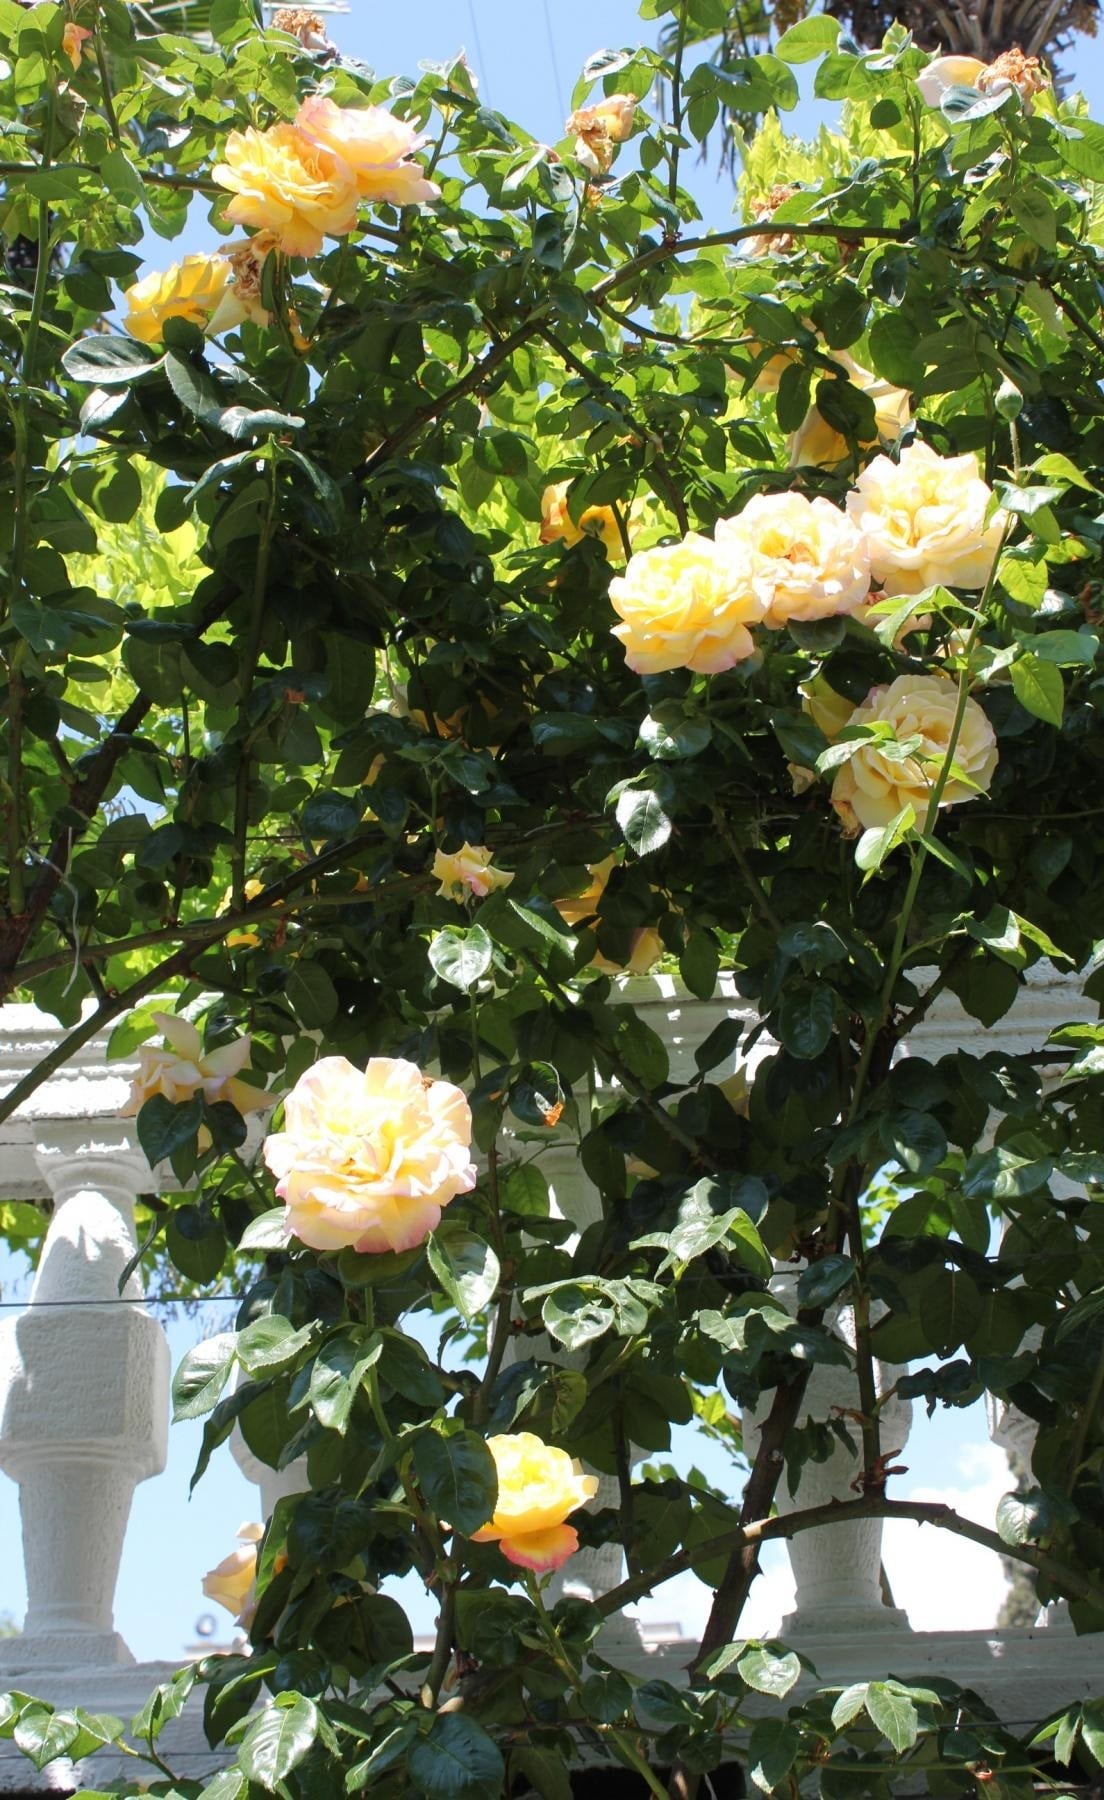 Real Decoration of the Garden - Climbing Roses